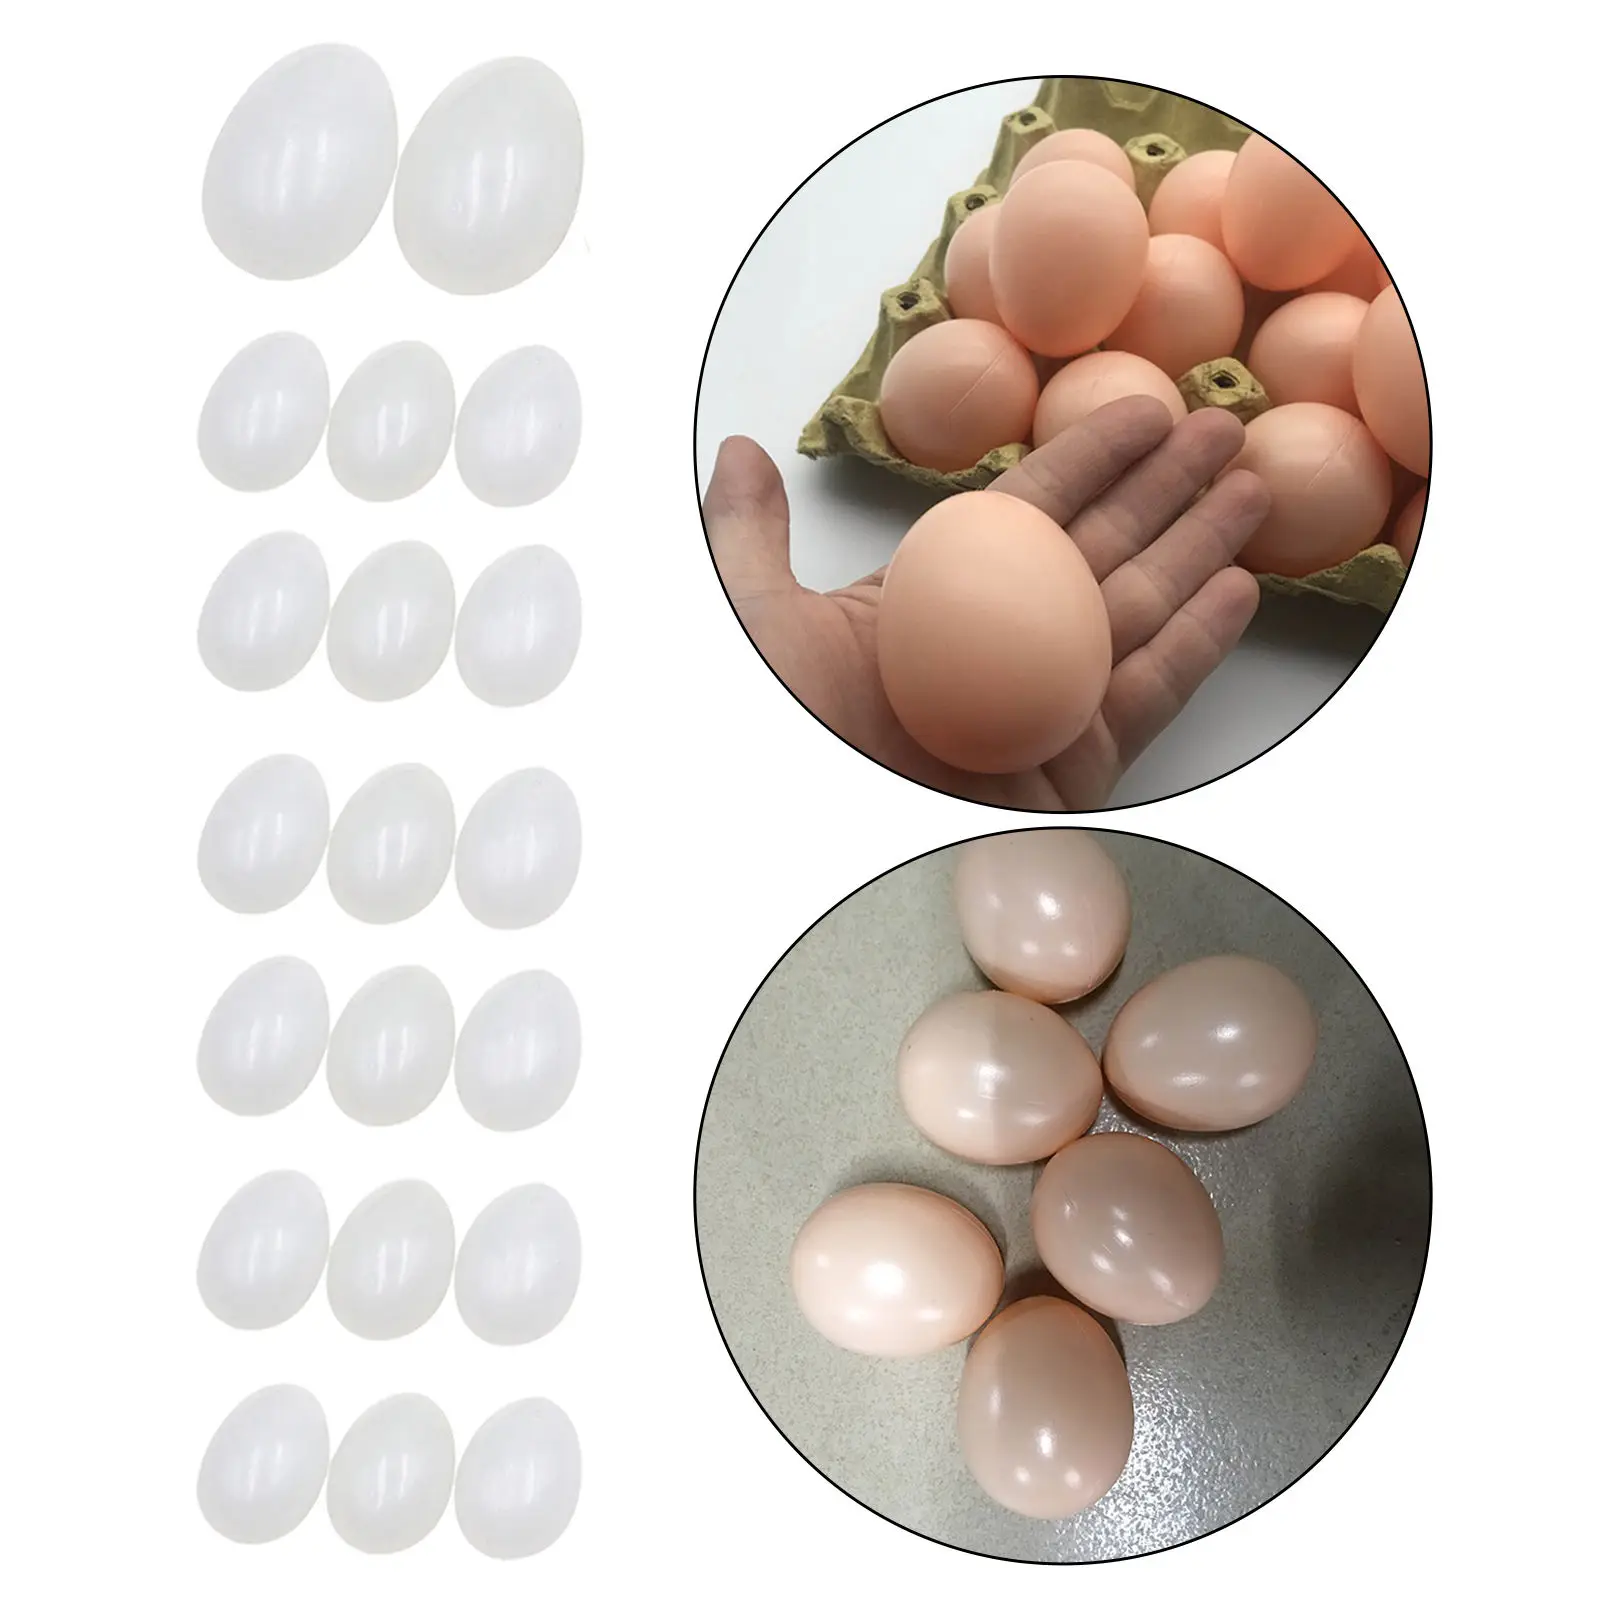 Plastic Simulation Eggs For Diy Painting Home Decoration Party Supplies  Farm Animal Cages Chicken Coop Accessories Parts - Cages & Accessories -  AliExpress